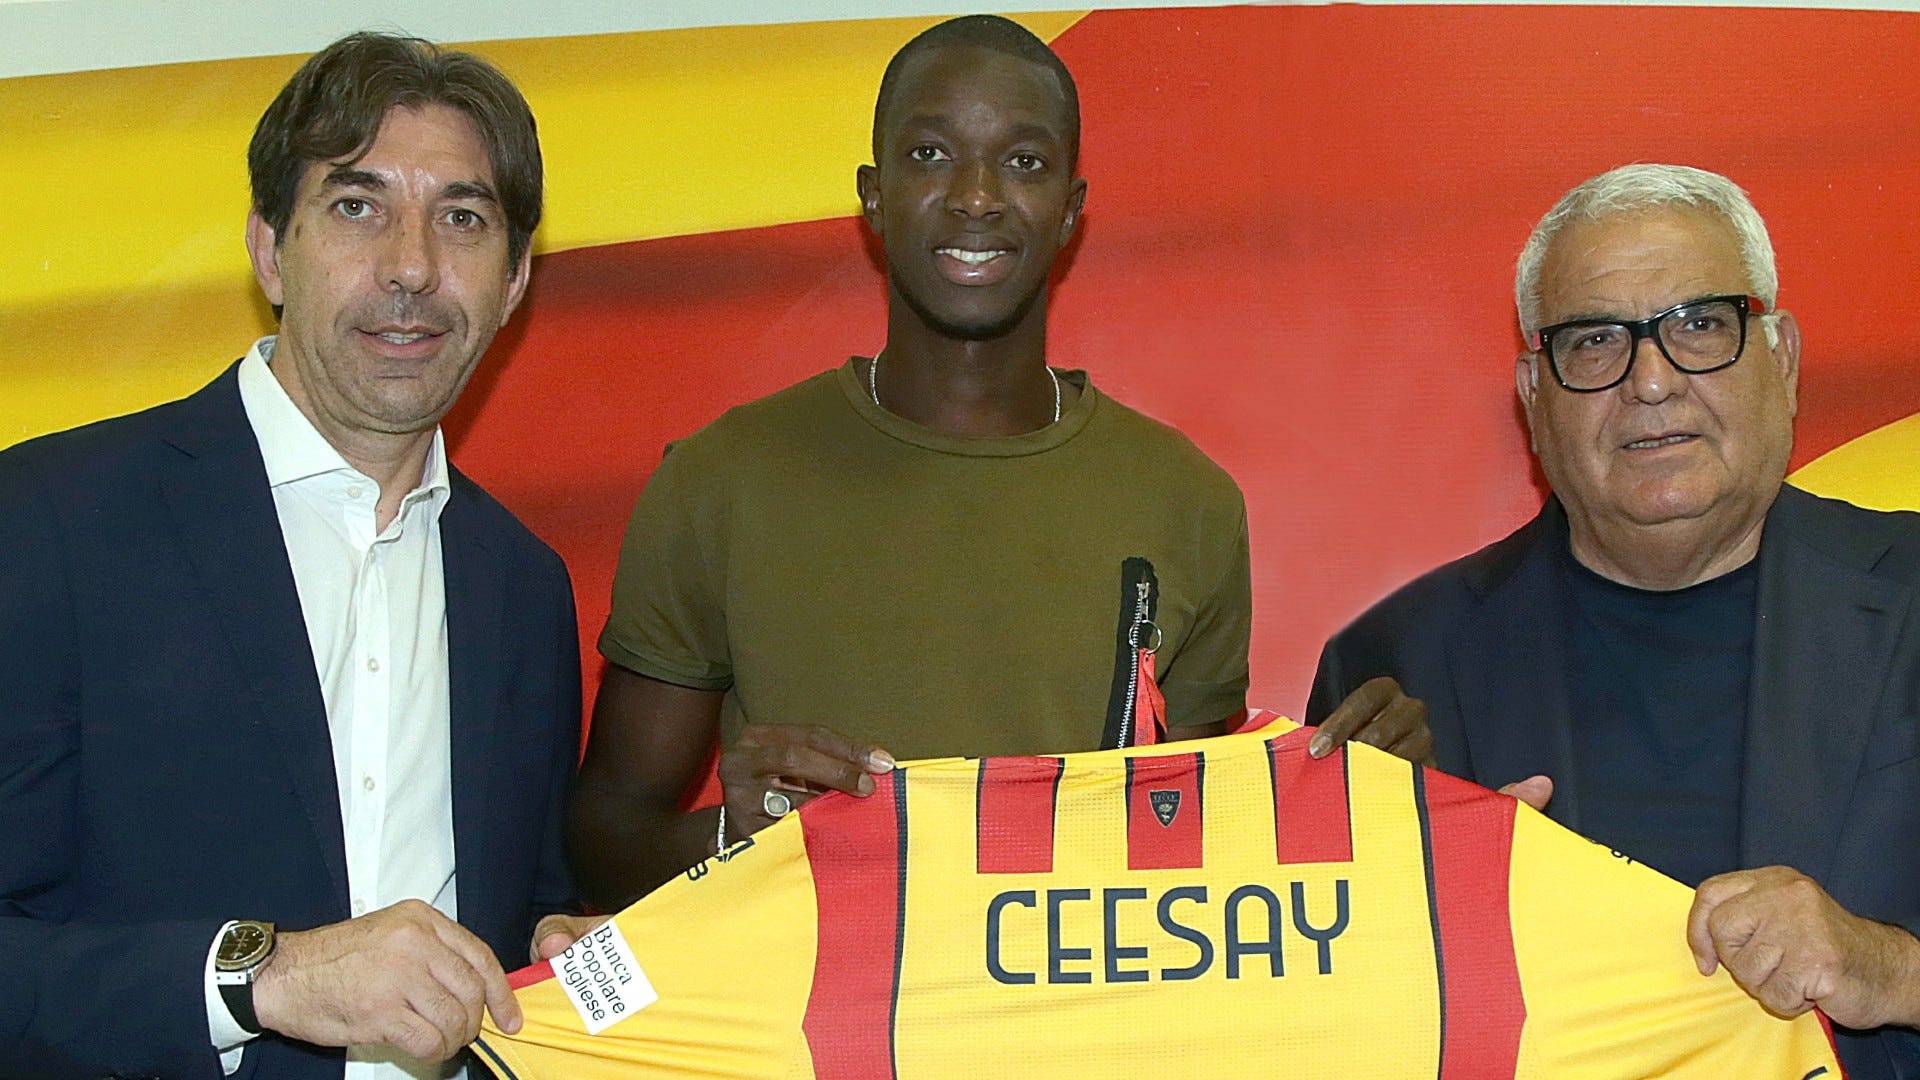  US Lecce sign Assan Ceesay from the Gambia.